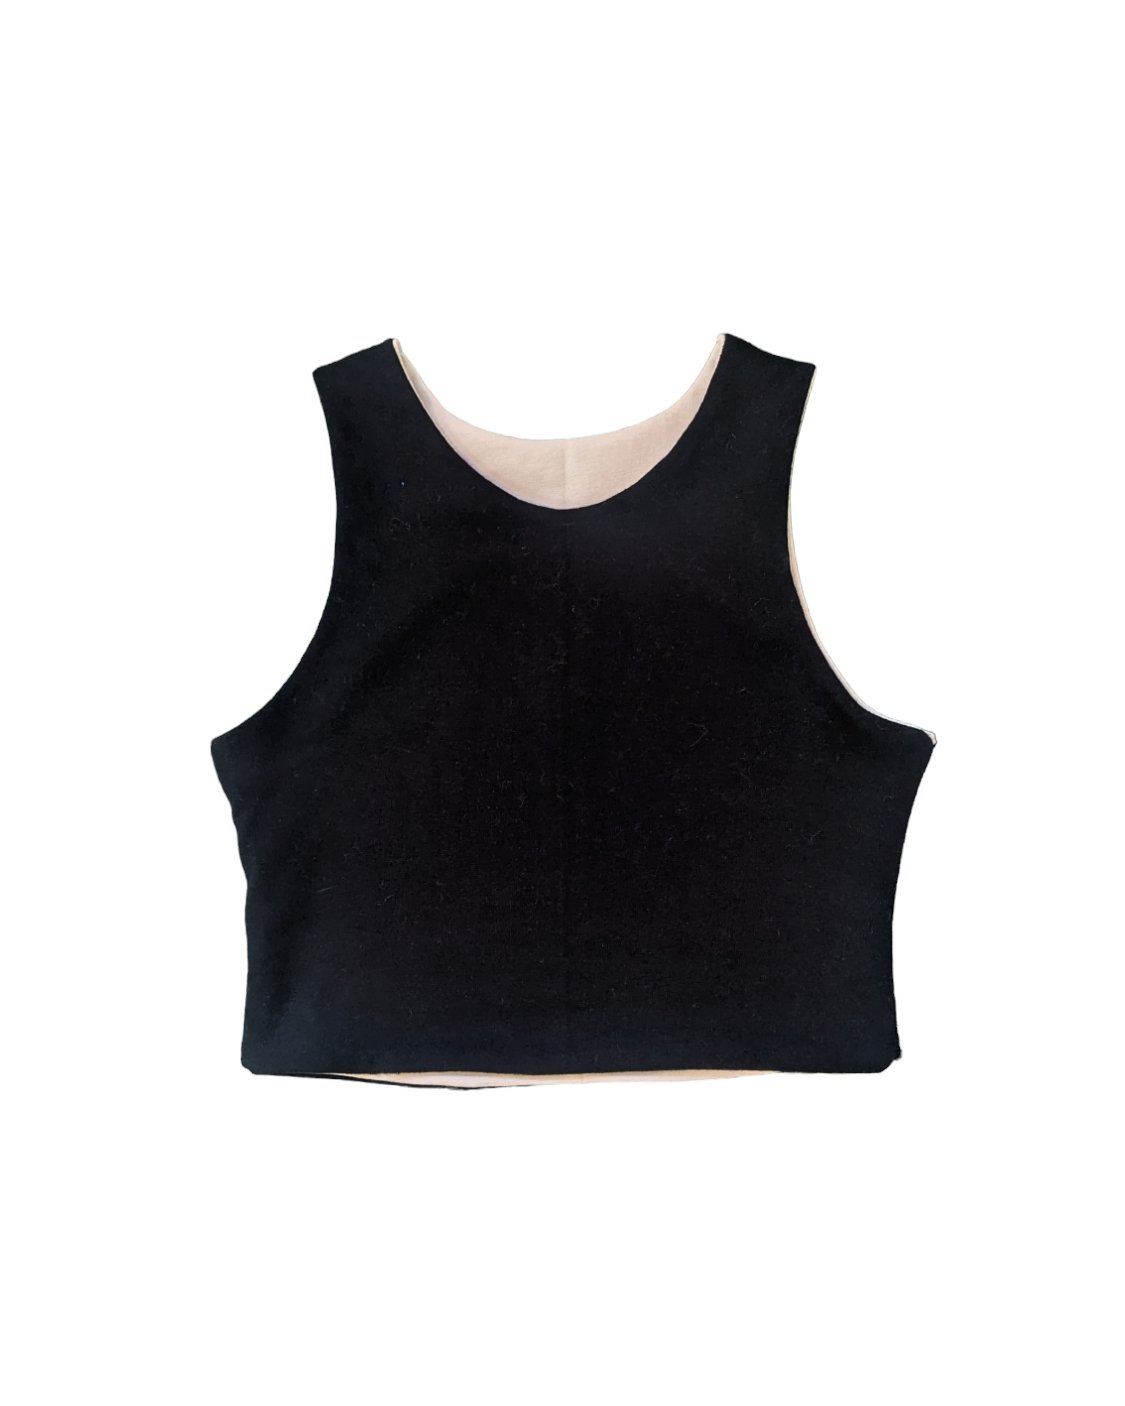 Image of CATCALL: THE REVERSIBLE CROP TOP in BLACK